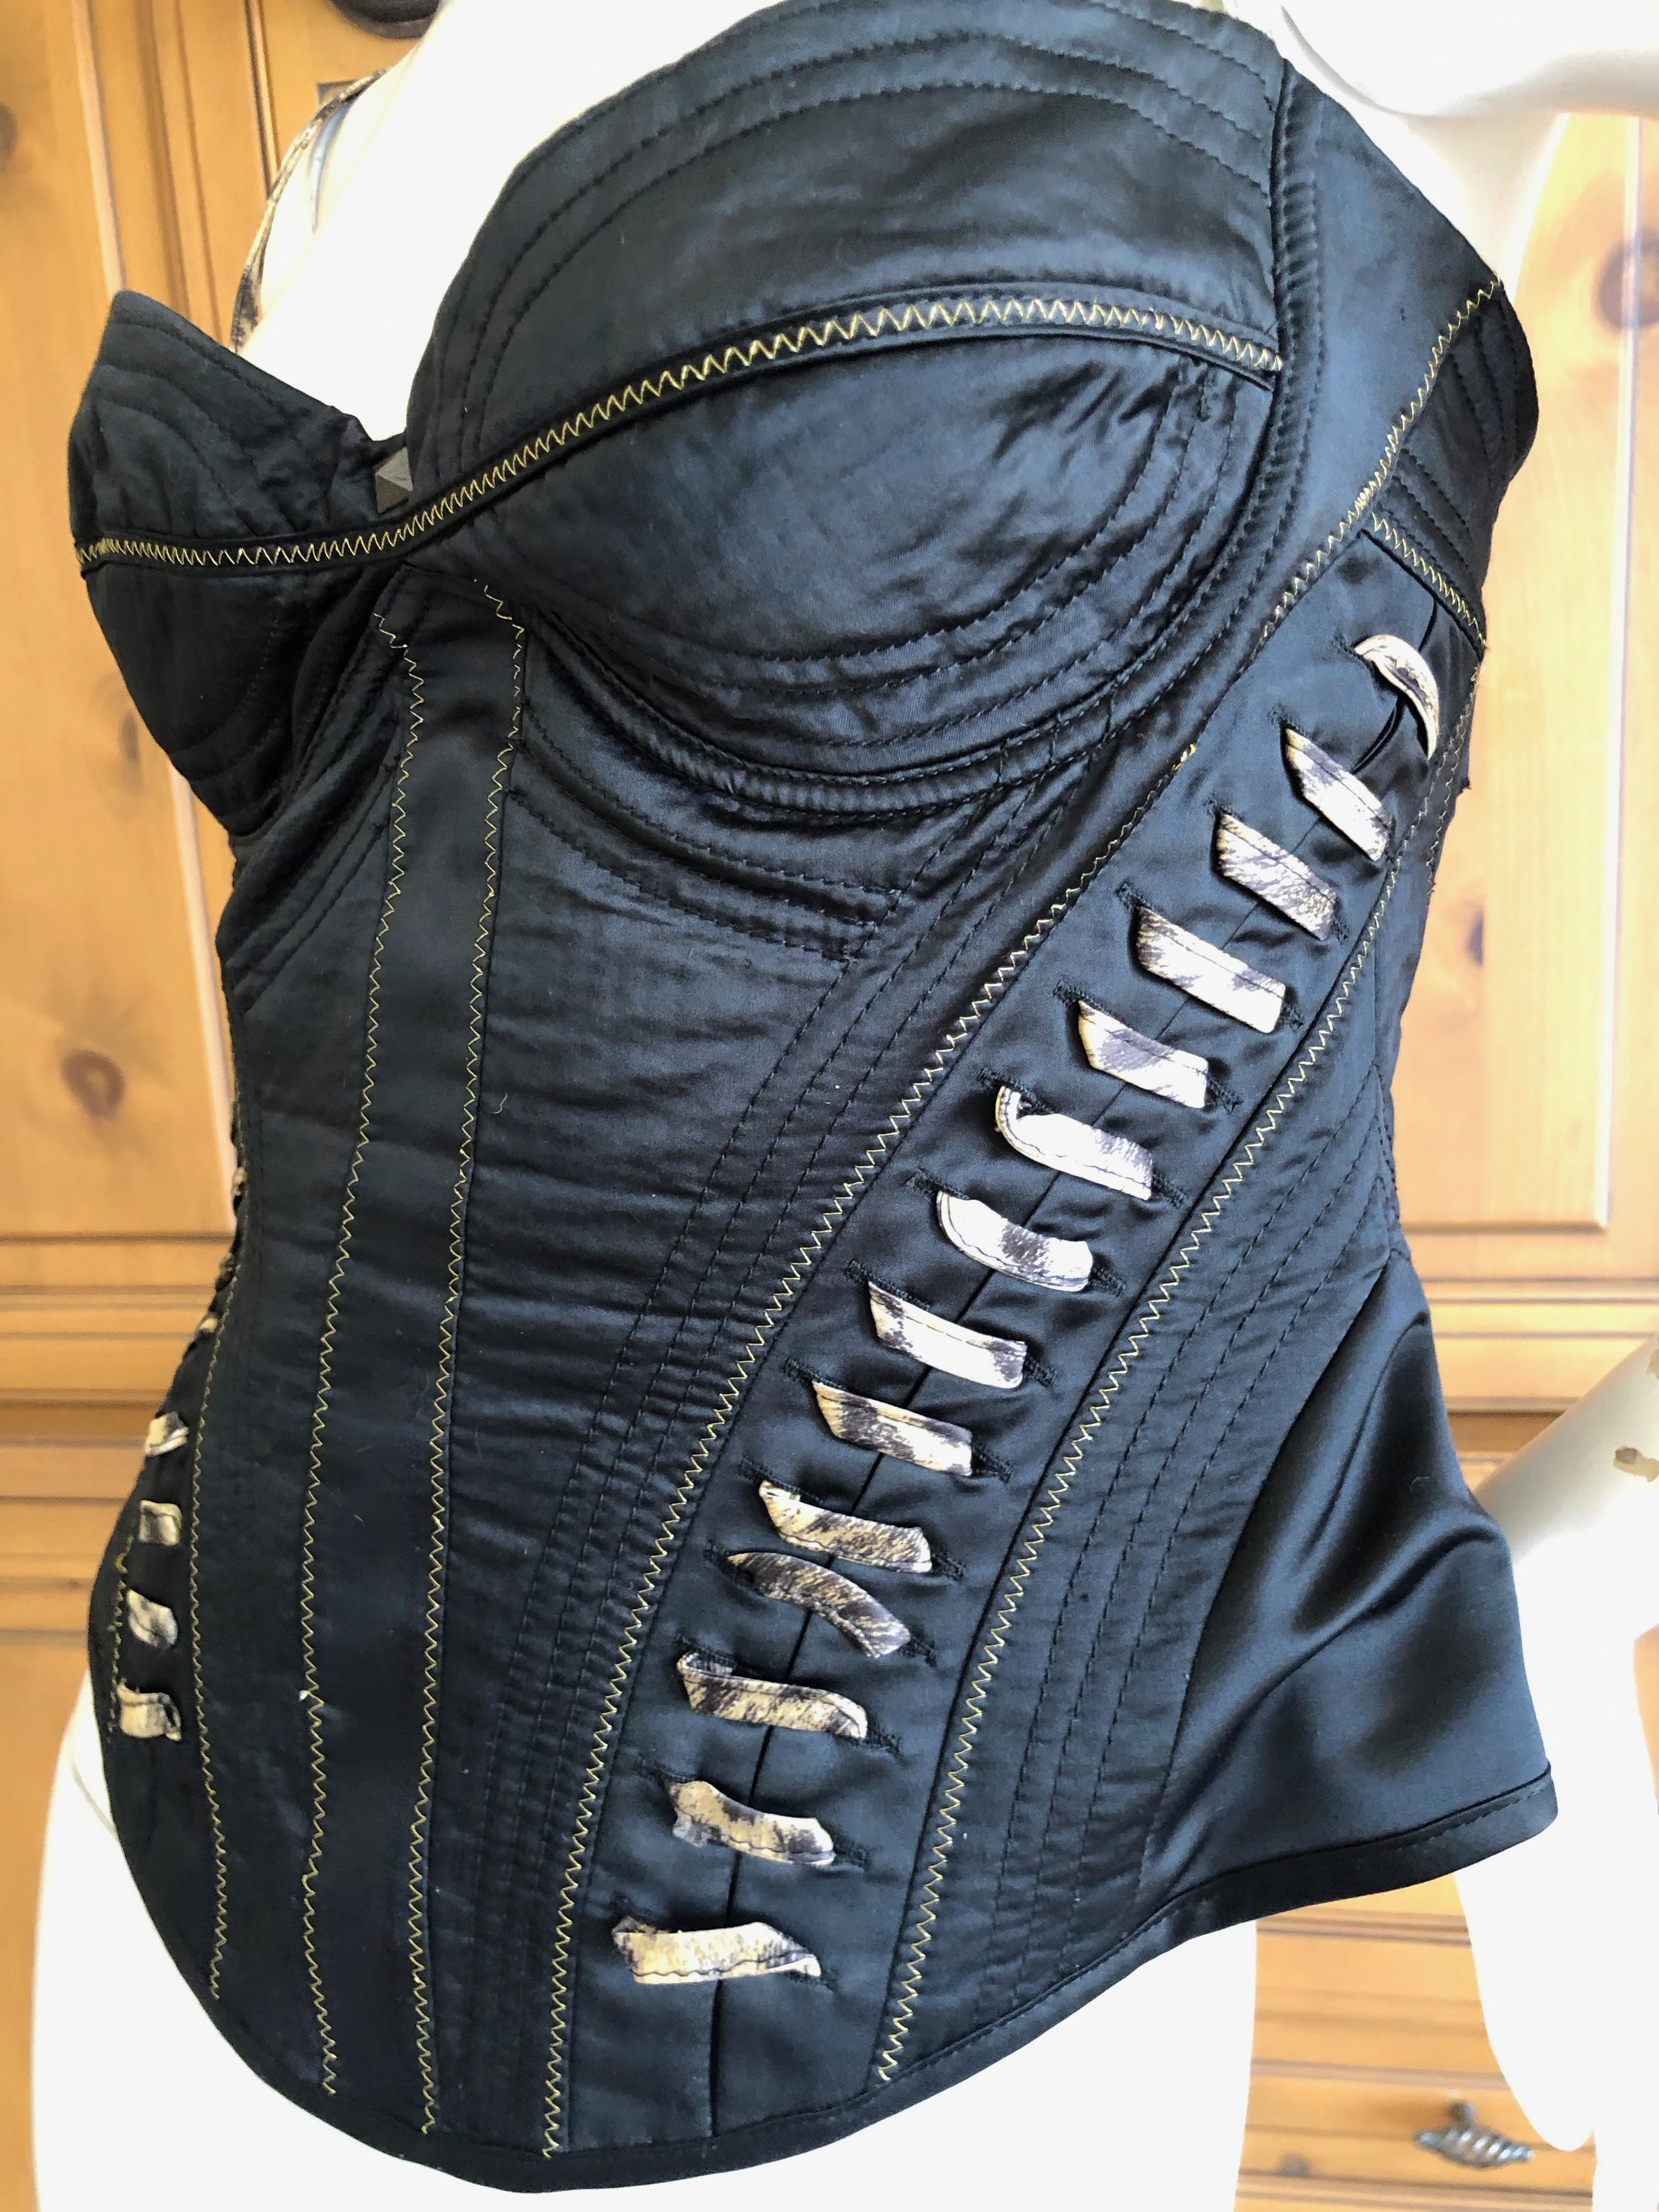 Roberto Cavalli for Just Cavalli Black Corset with Leopard Print Lace Up Details In Excellent Condition For Sale In Cloverdale, CA